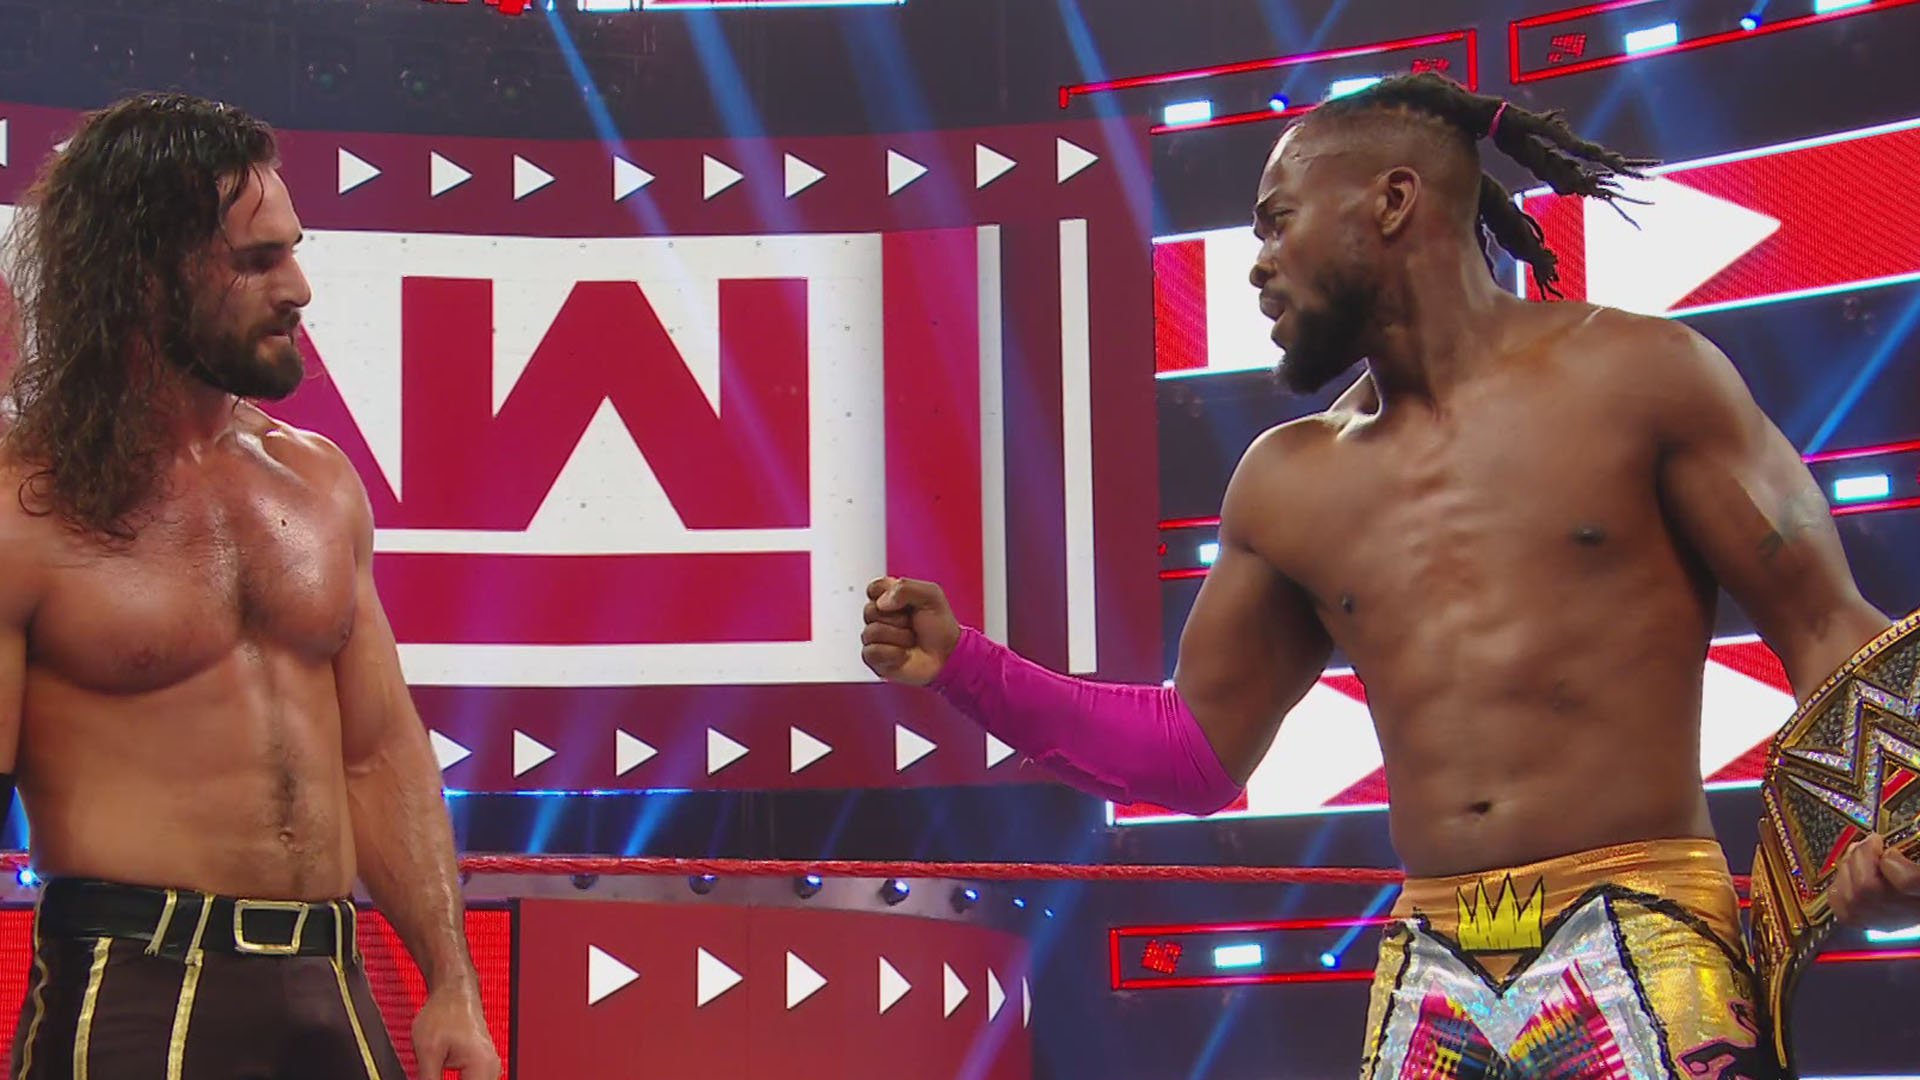 Universal Champion Seth Rollins & WWE Champion Kofi Kingston def. The Bar after they crashed the Winner Take All main event